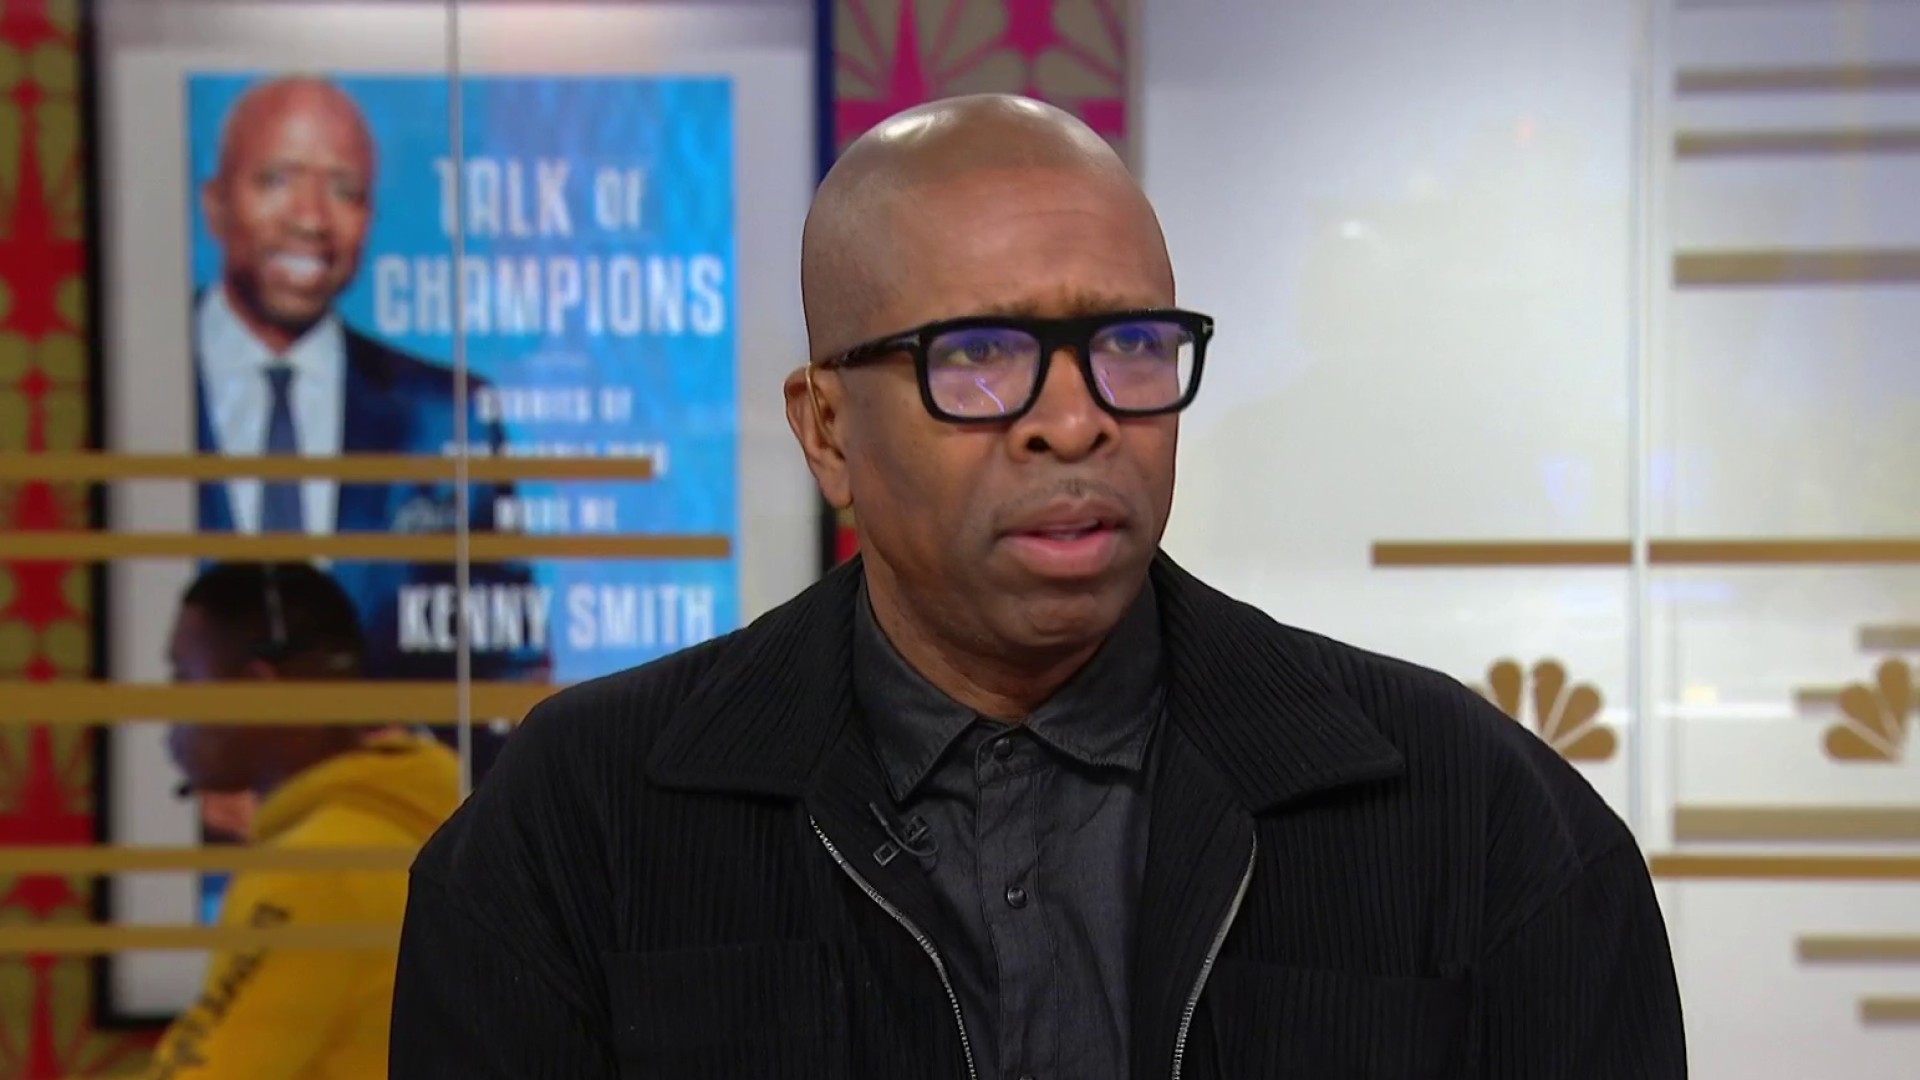 Video: Kenny Smith on his new book 'Talk of Champions'